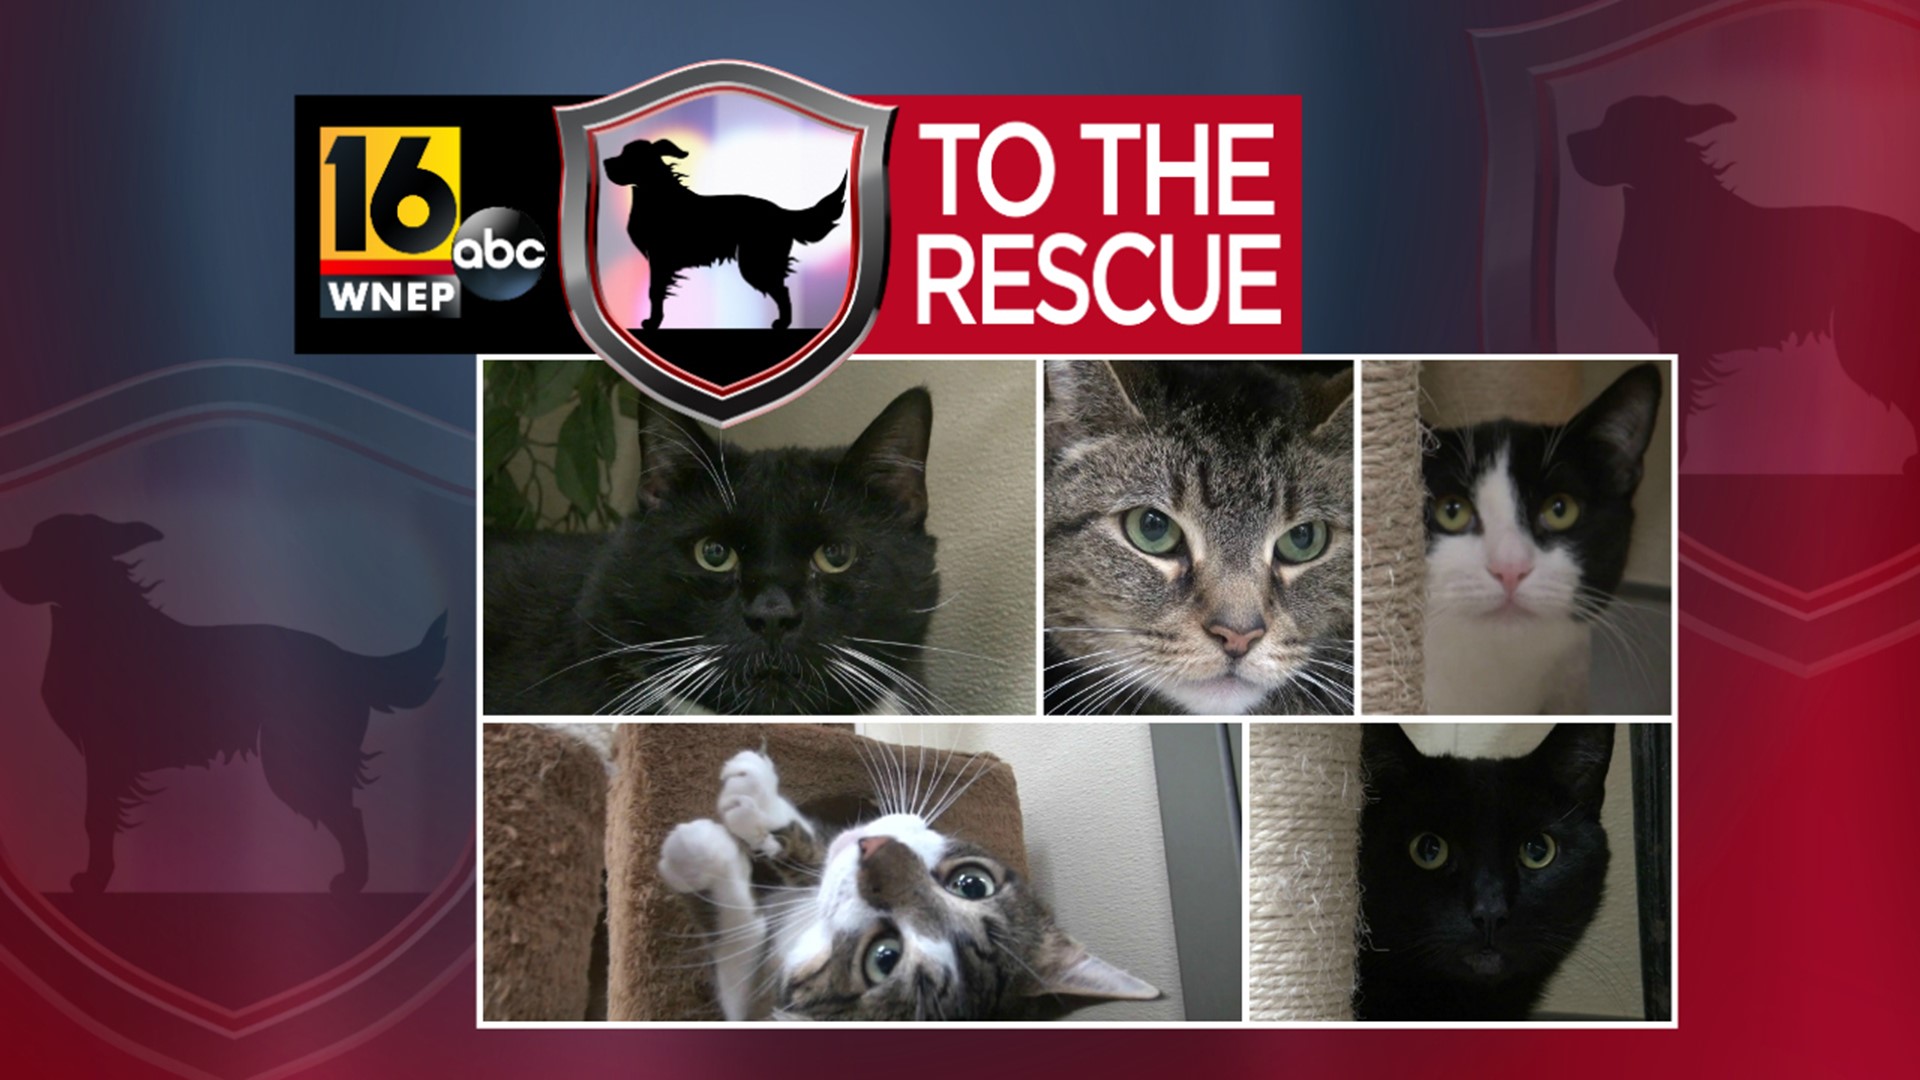 The shelter in Lackawanna County has lots of kitties that need forever homes.